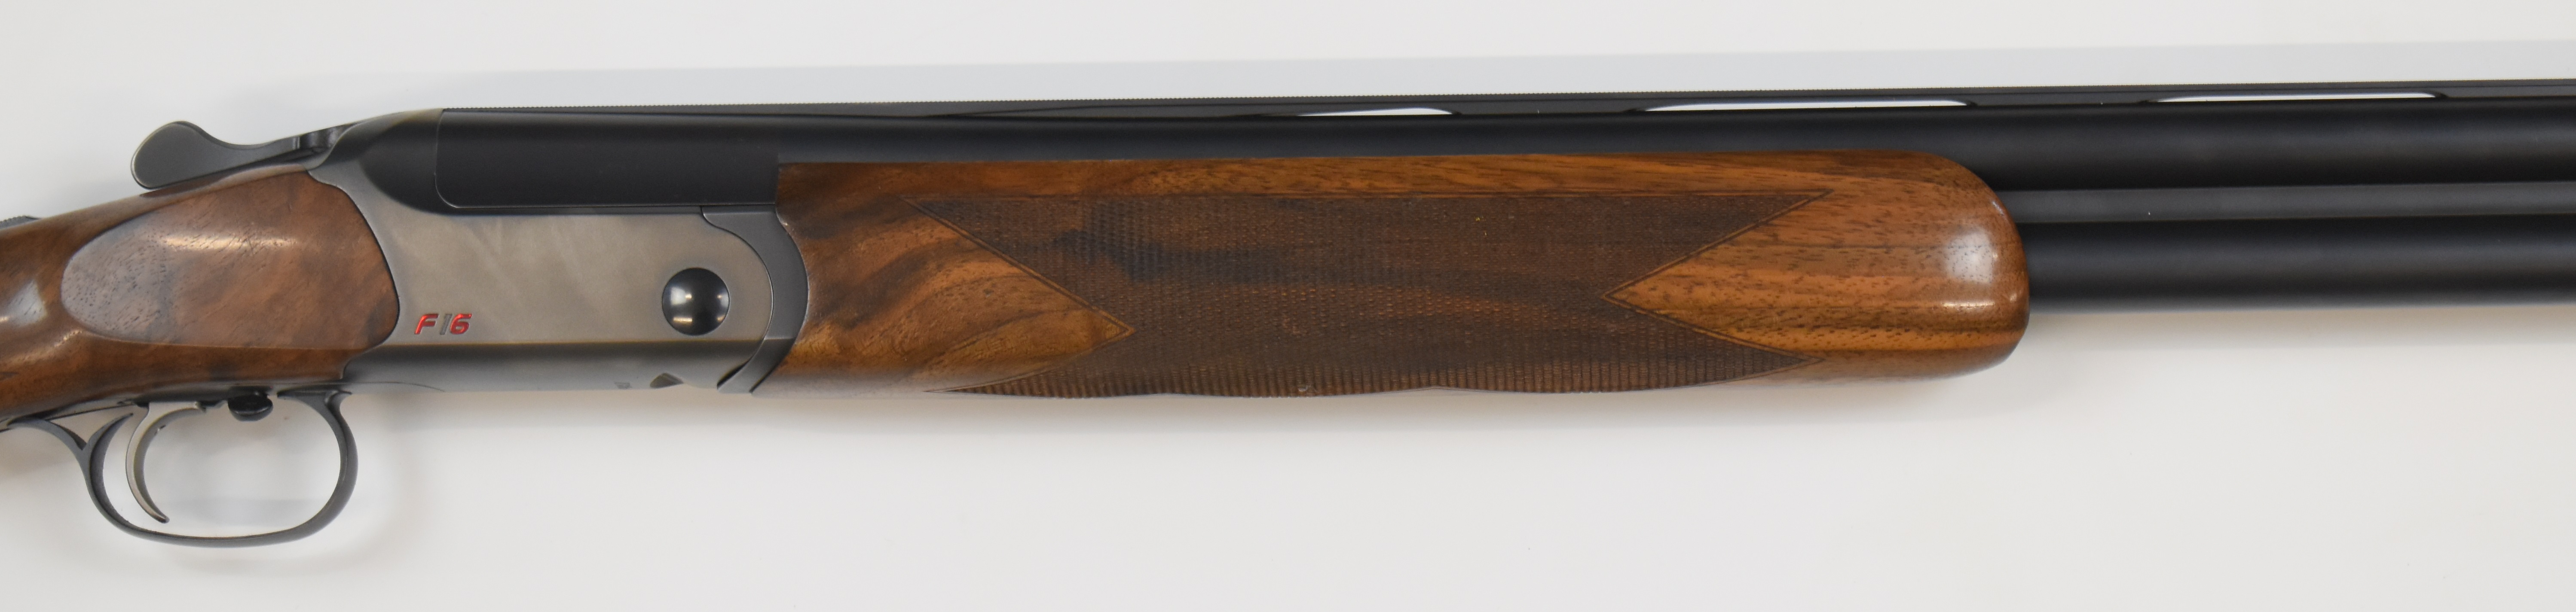 Blaser F16 12 bore over under ejector shotgun with named locks and underside, chequered semi- - Image 15 of 22